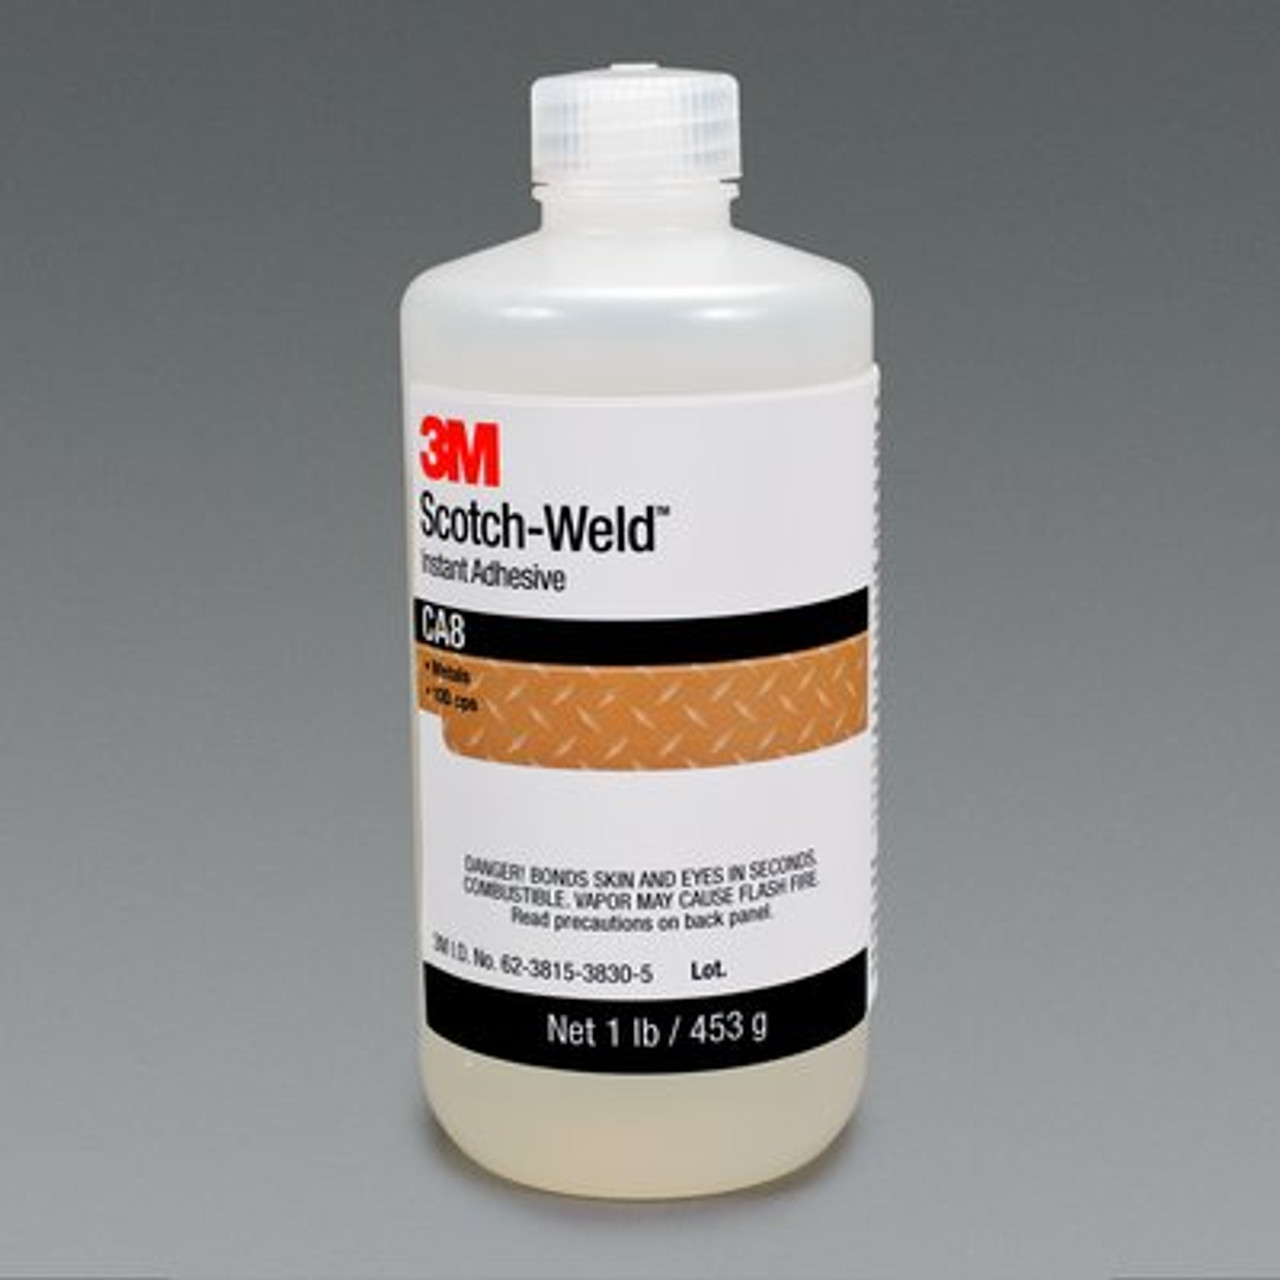 3M™ Scotch-Weld™ Instant Adhesive CA8, Clear, 1 Pound Bottle